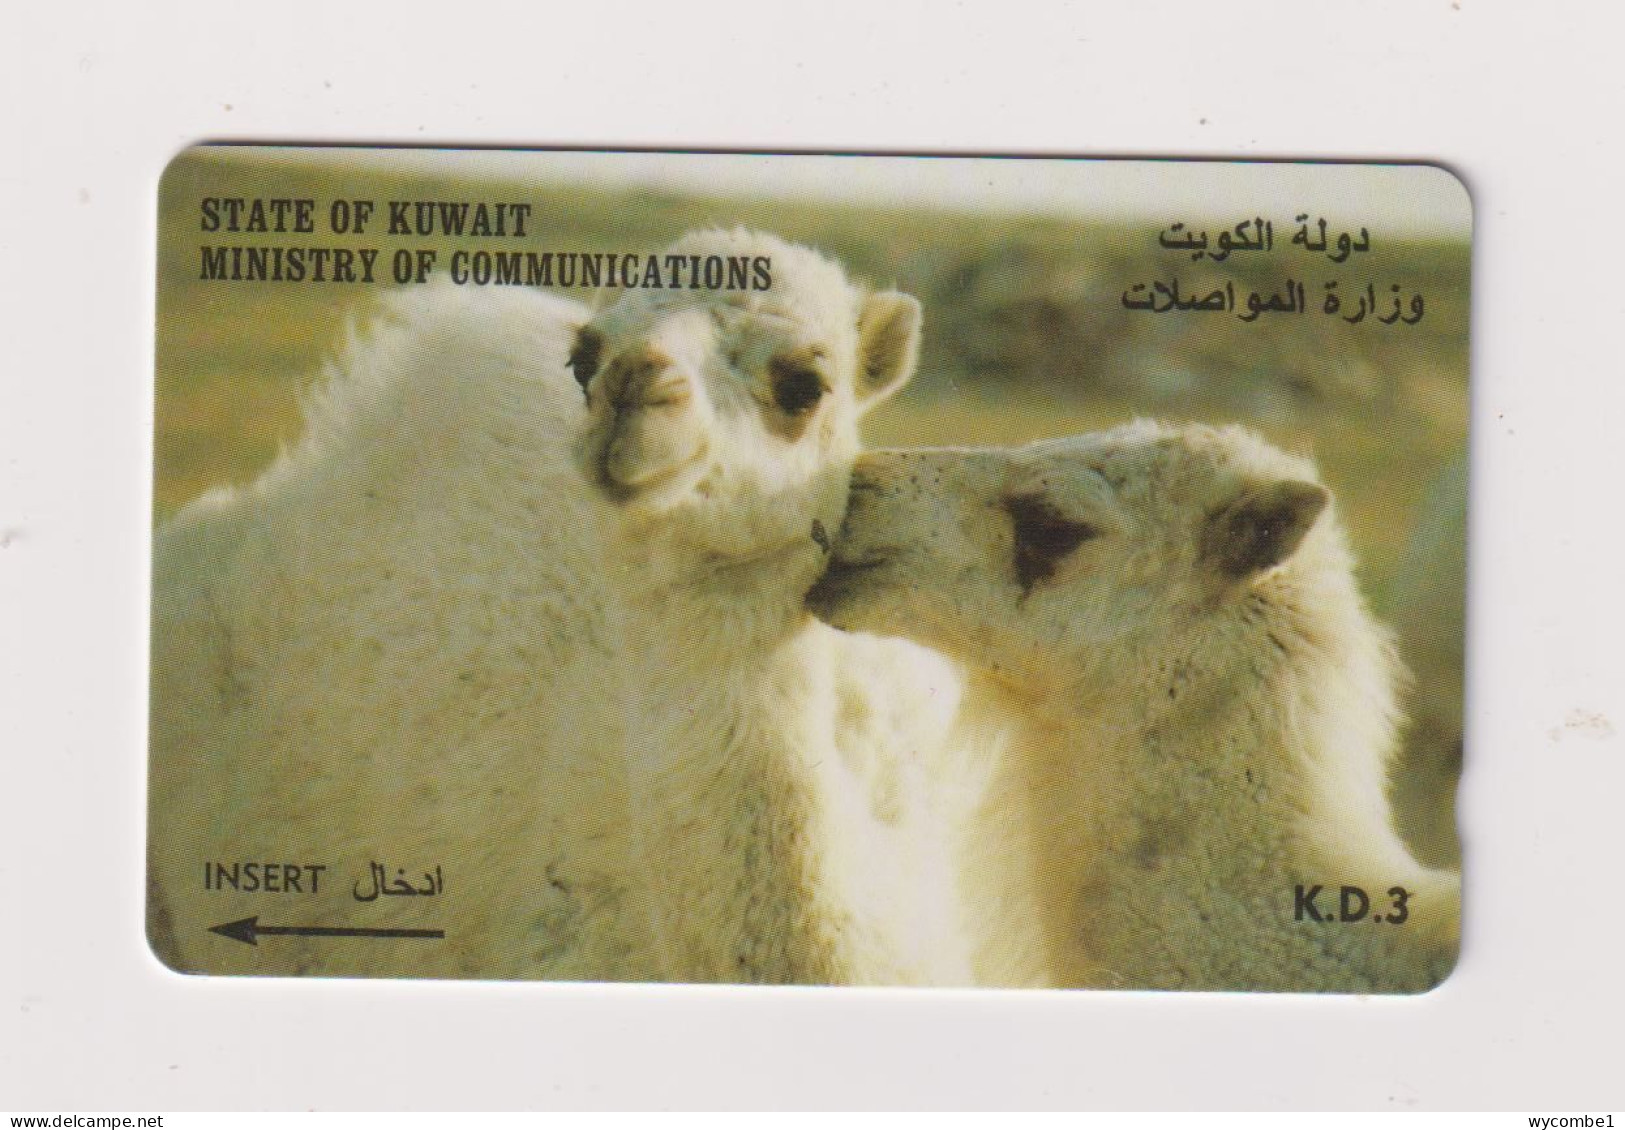 KUWAIT - Baby Camels 3kd GPT Magnetic Phonecard - Kuwait